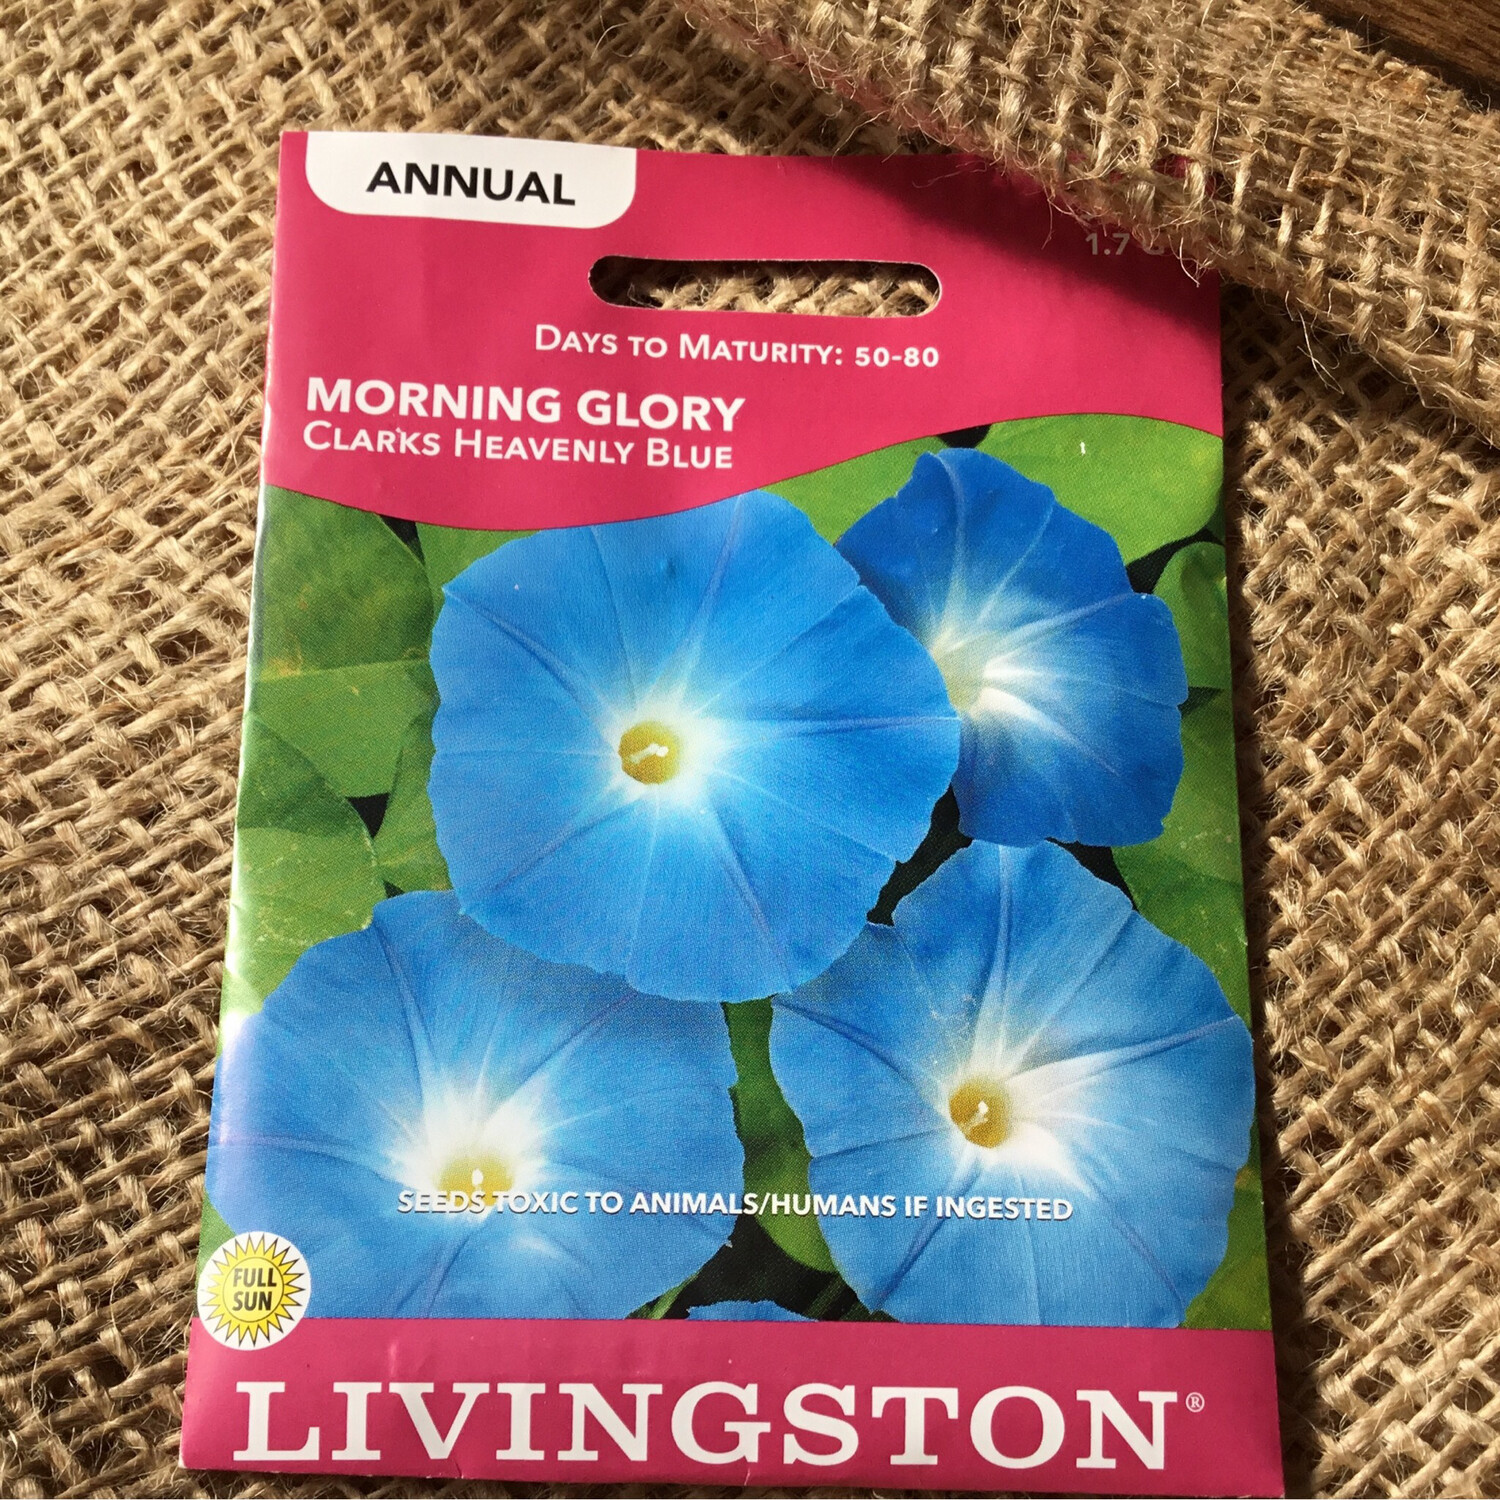 (Seed) Climber Morning Glory Clarks Heavenly Blue $2.99